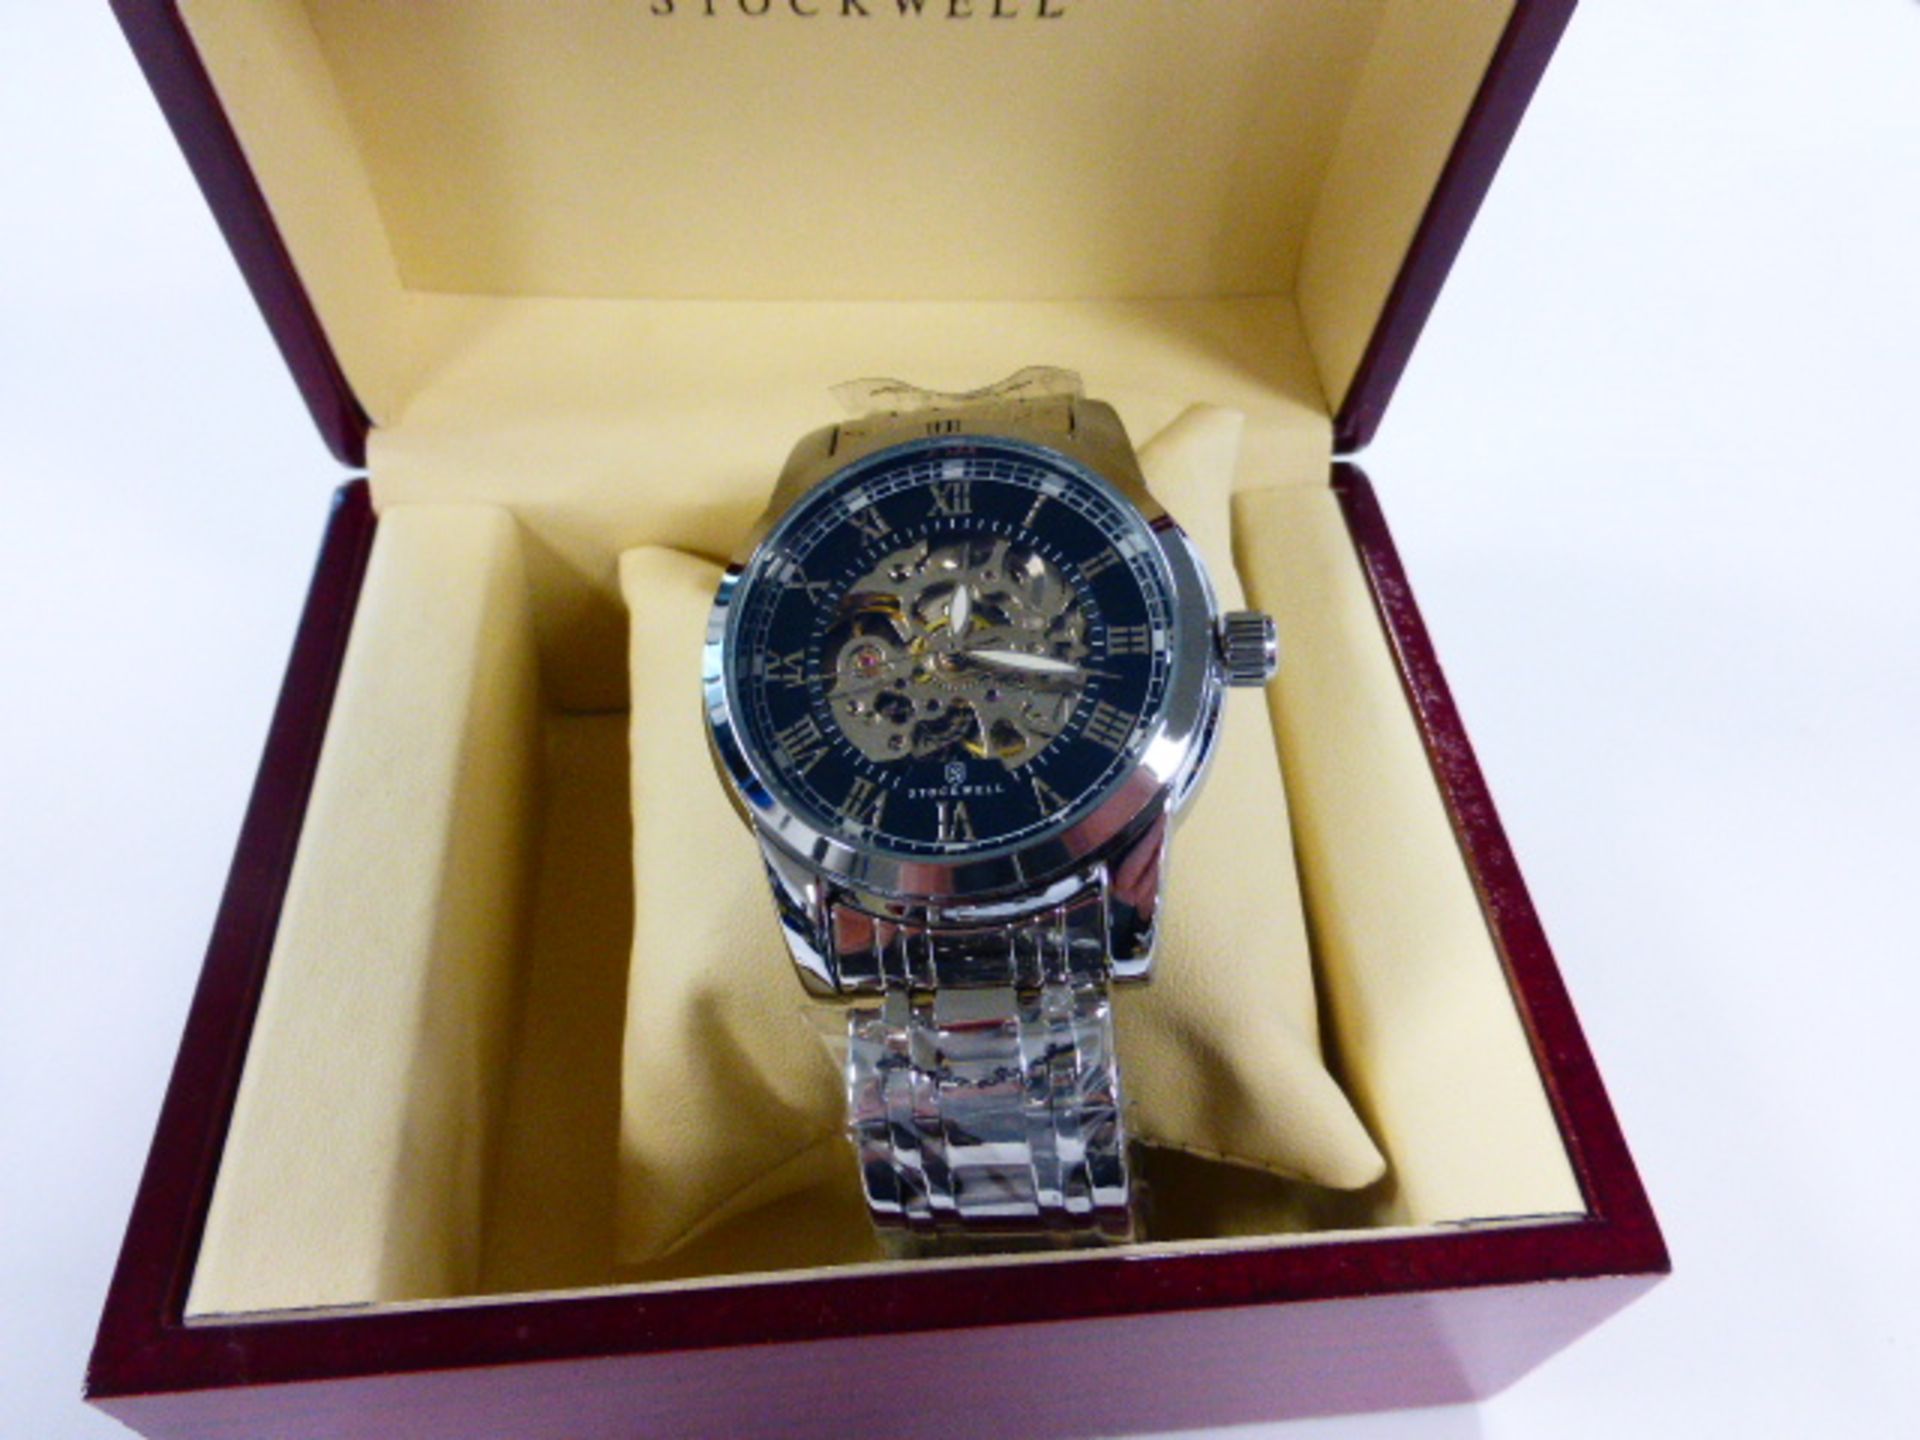 Stockwell mens automatic watch with skeleton dial - Image 2 of 2